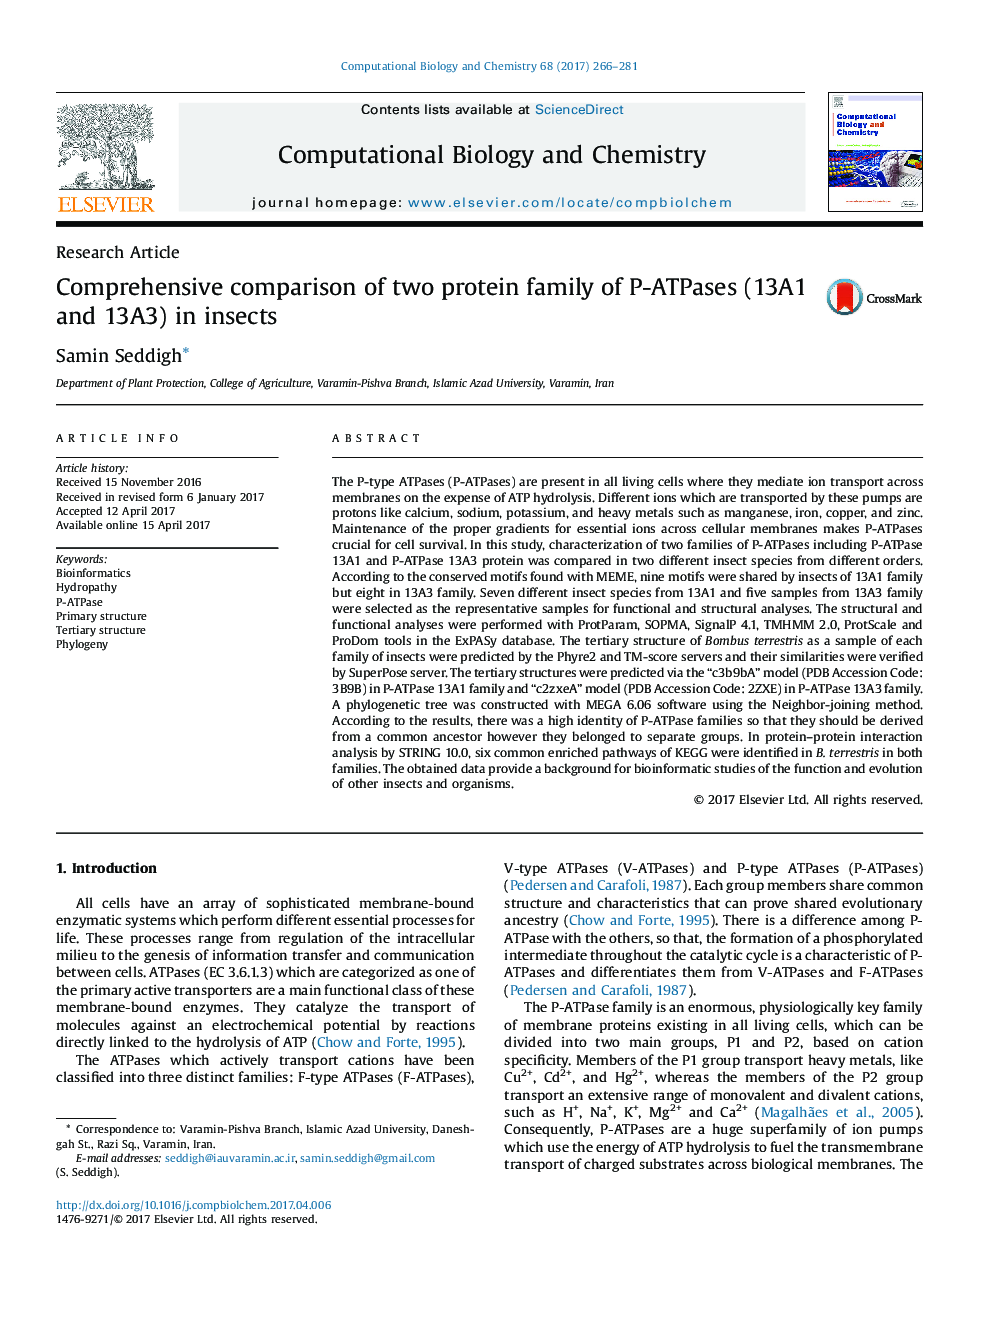 Research ArticleComprehensive comparison of two protein family of P-ATPases (13A1 and 13A3) in insects